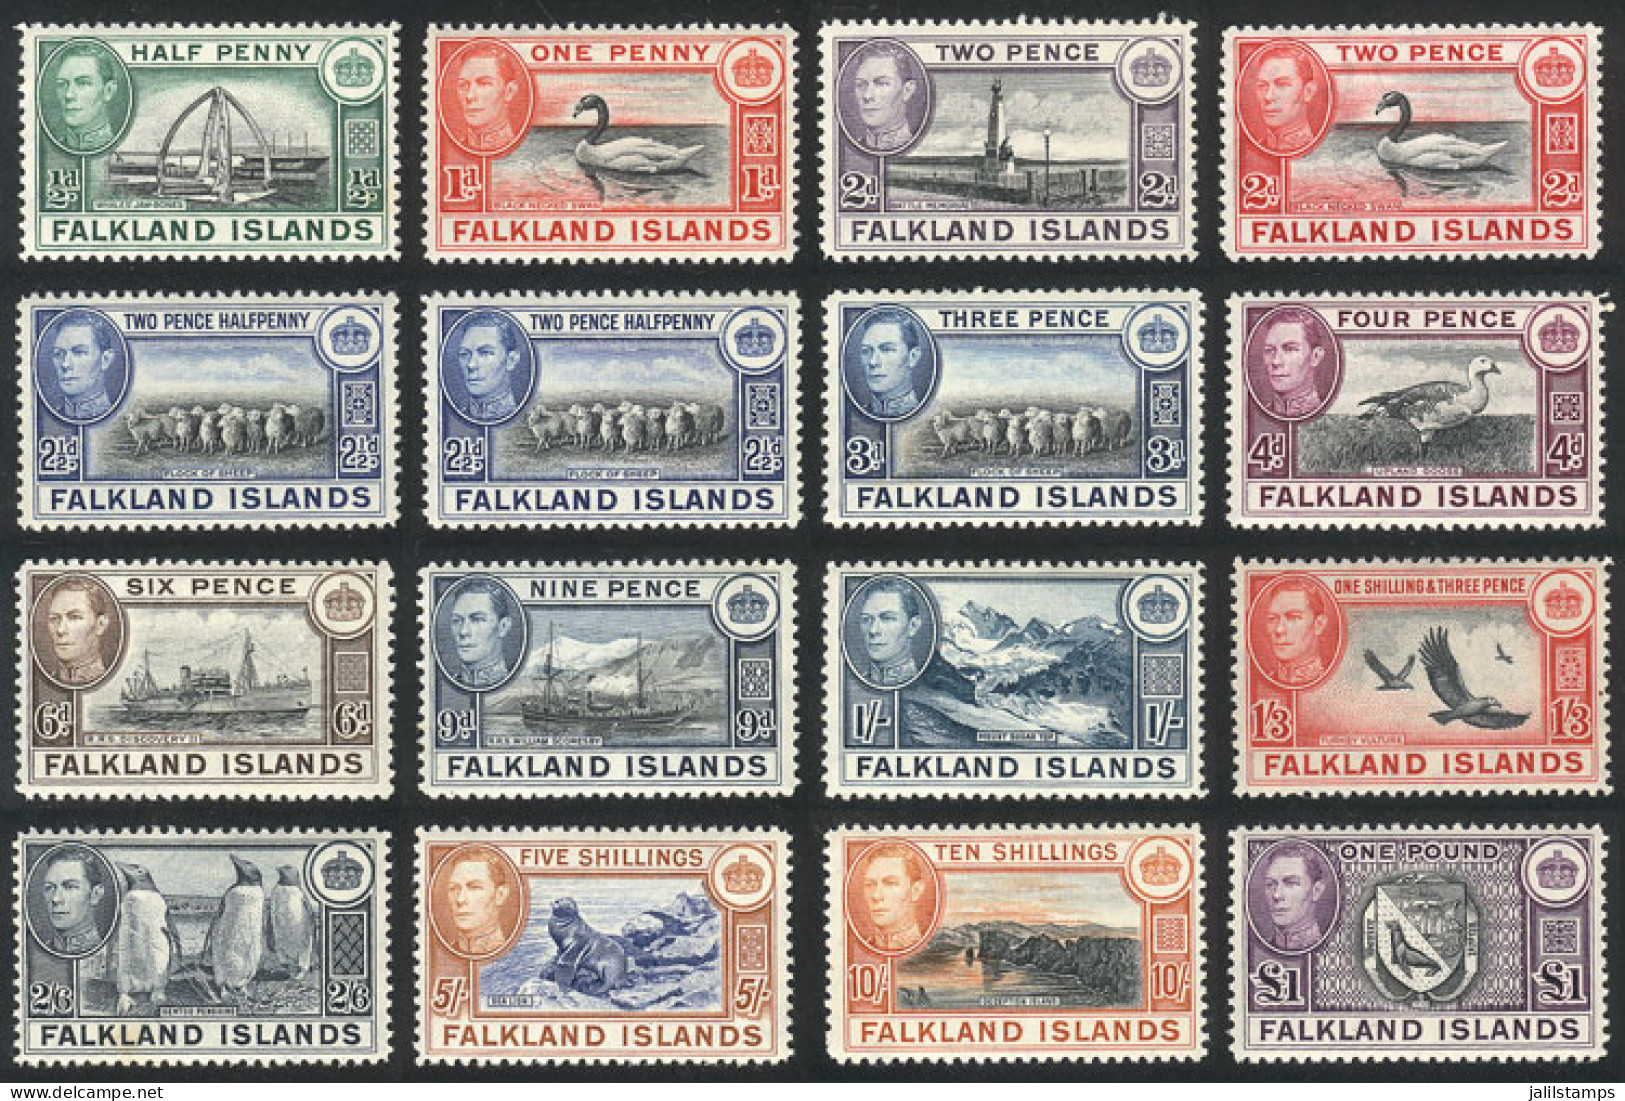 FALKLAND ISLANDS/MALVINAS: Sc.84/96 (without 85B), 1938/46, 15 Values Of The Set Of 16 (only The 1p. Violet Missing), MN - Falkland Islands